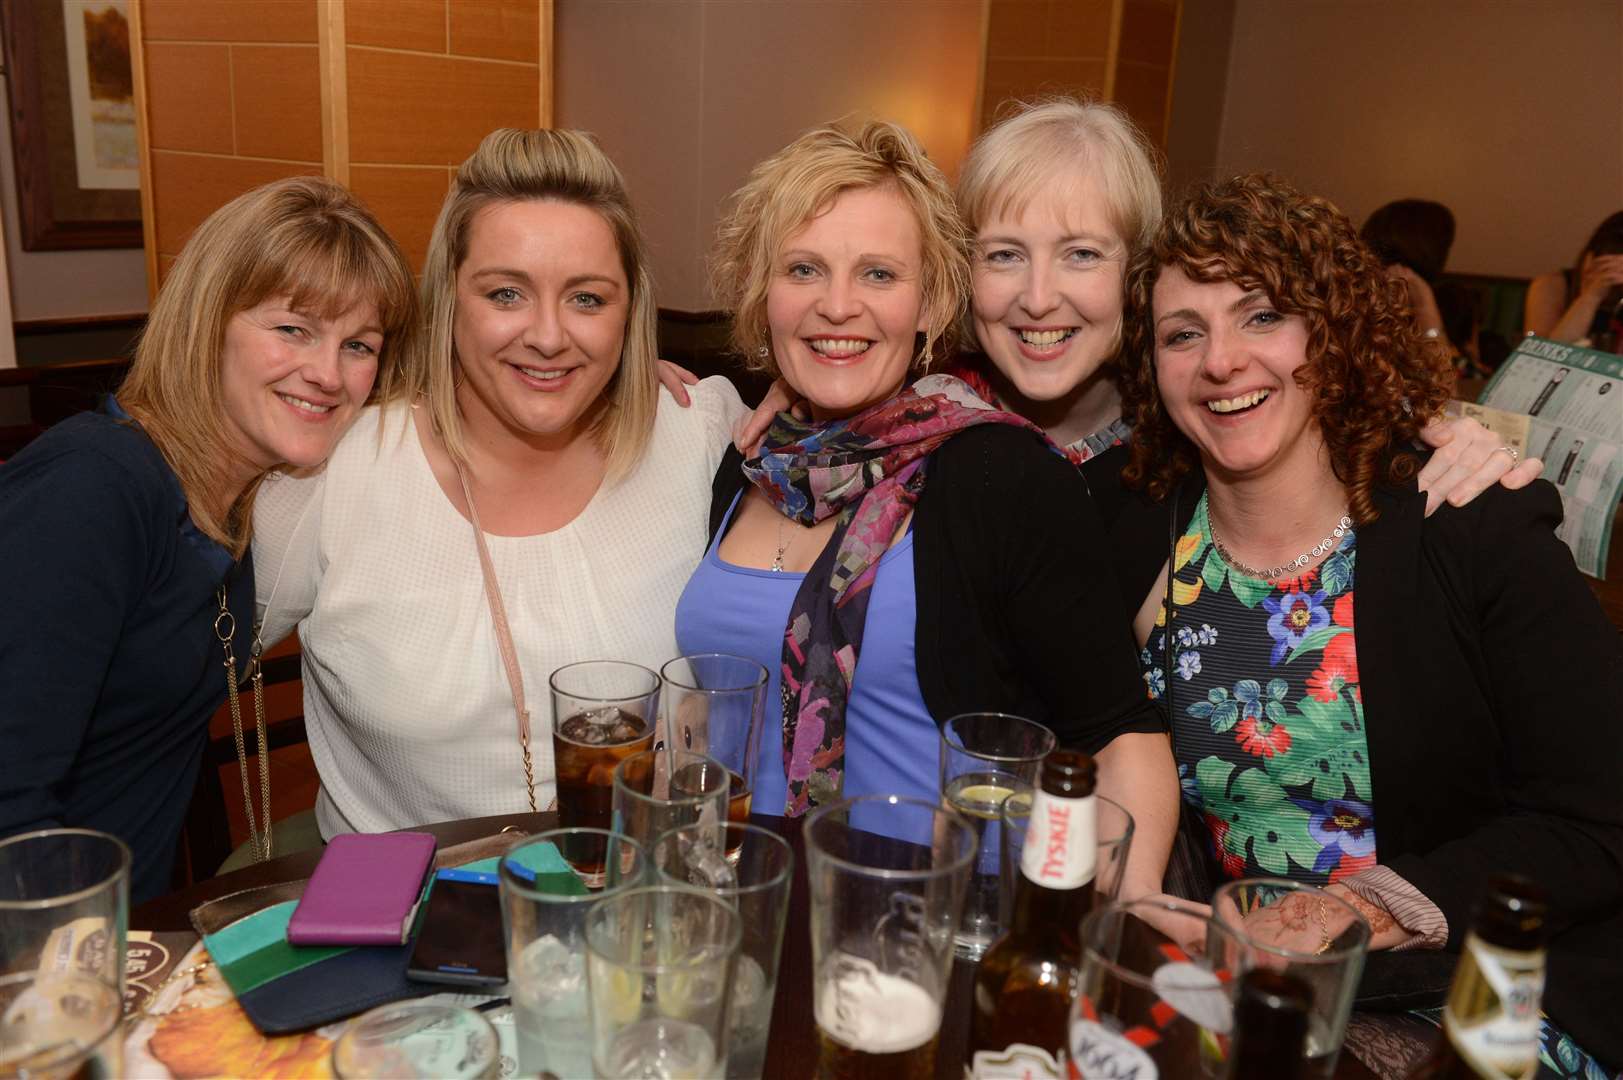 City Seen 2014-05-03..Inverness ladies Susan Morrison, Lynn MacArthur, Heather Maclennan, Fiona McQuarrie and Jill MacWilliam, having a fsmily night out in Wetherspoons..Pictures: Andrew Smith.Image No: 025548.